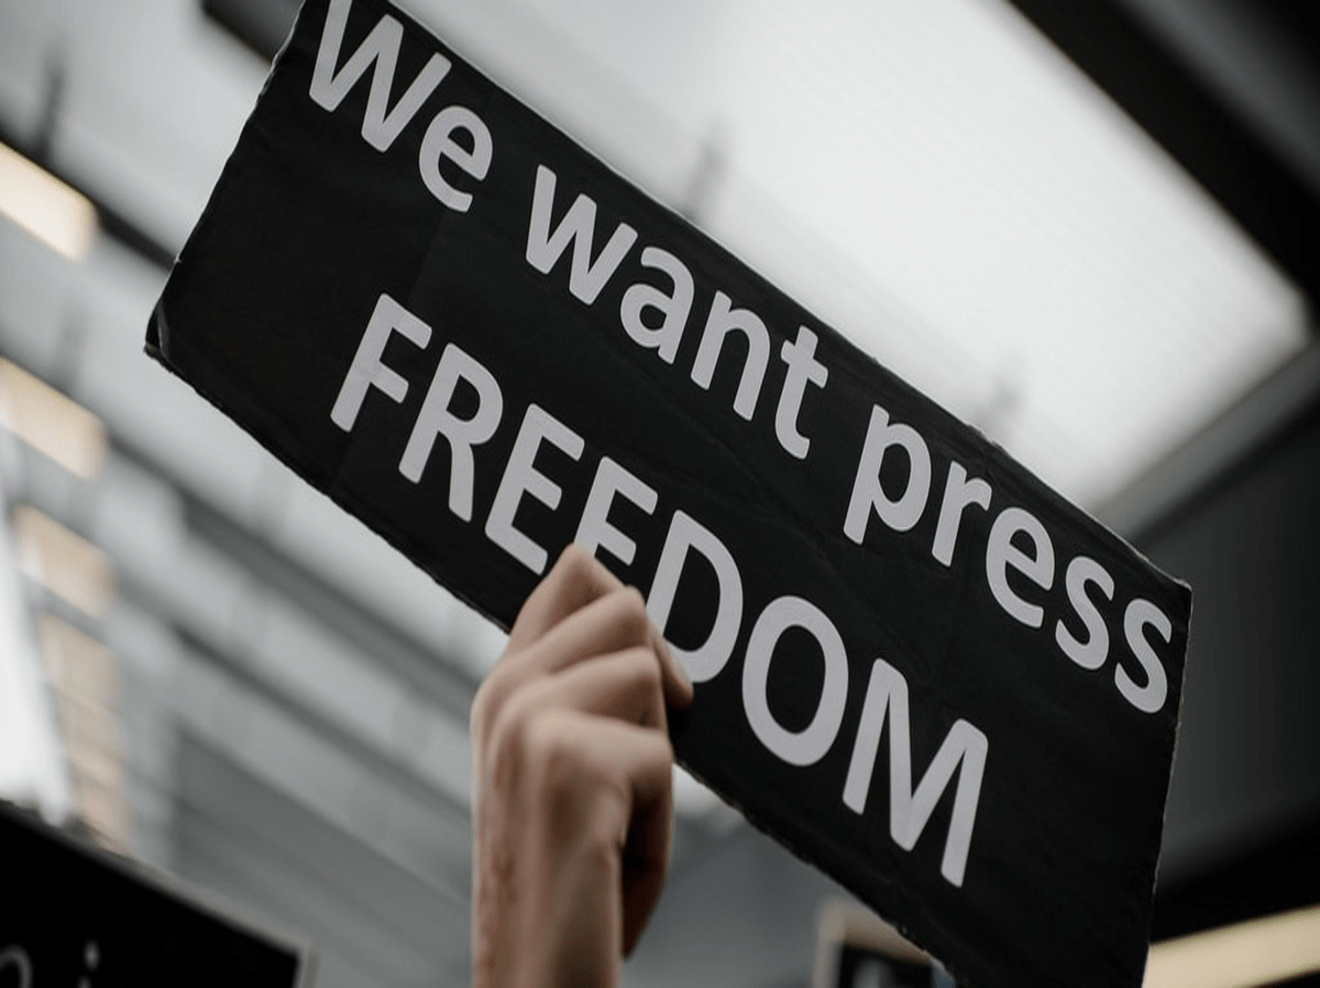 freedome of press